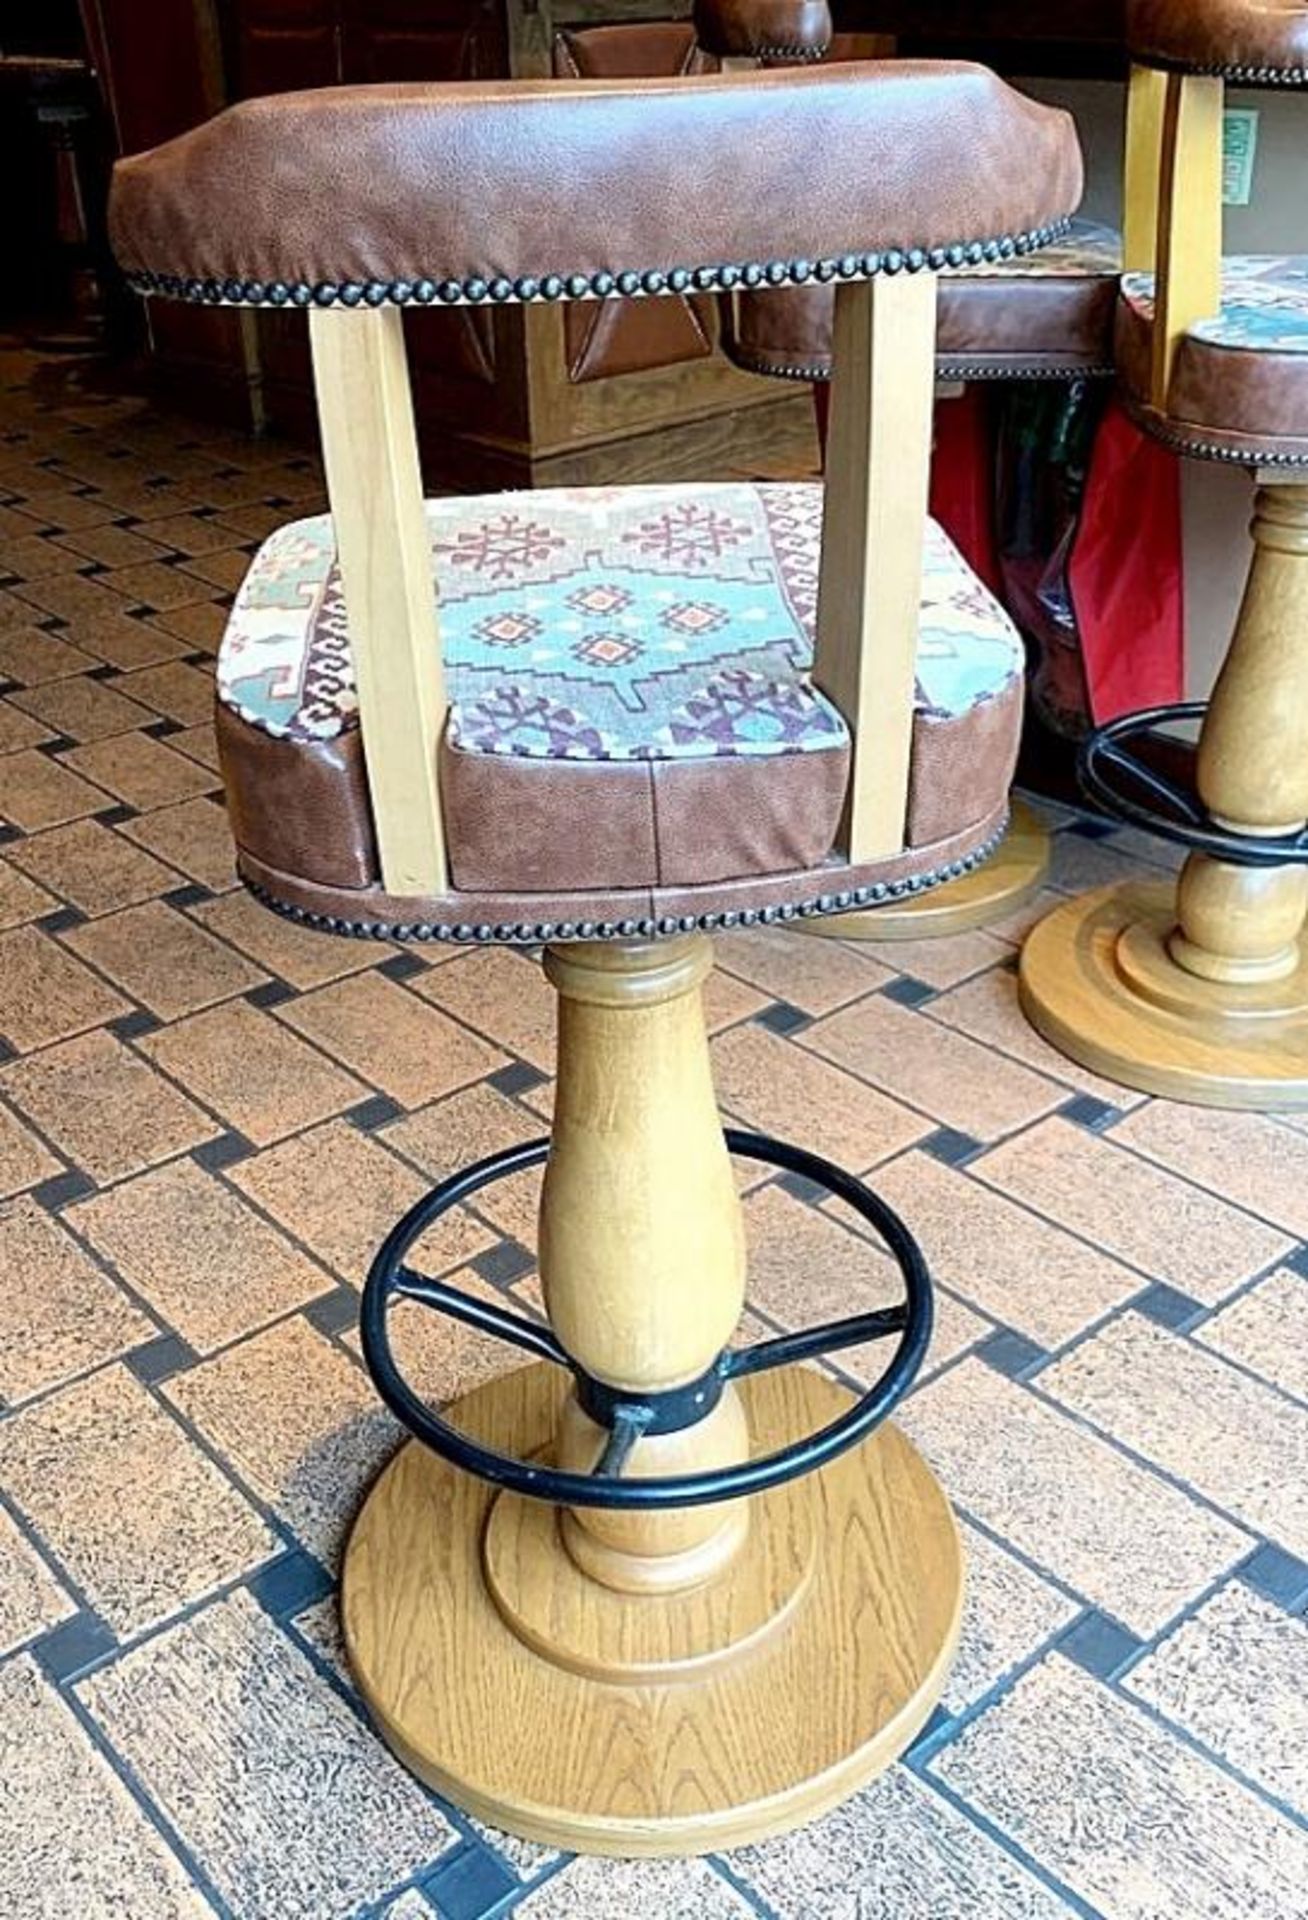 6 x Wood And Upholstered Bar Stools - Dimensions: H108cm x W45cm - CL339 - From a Popular Mexican Th - Image 2 of 3